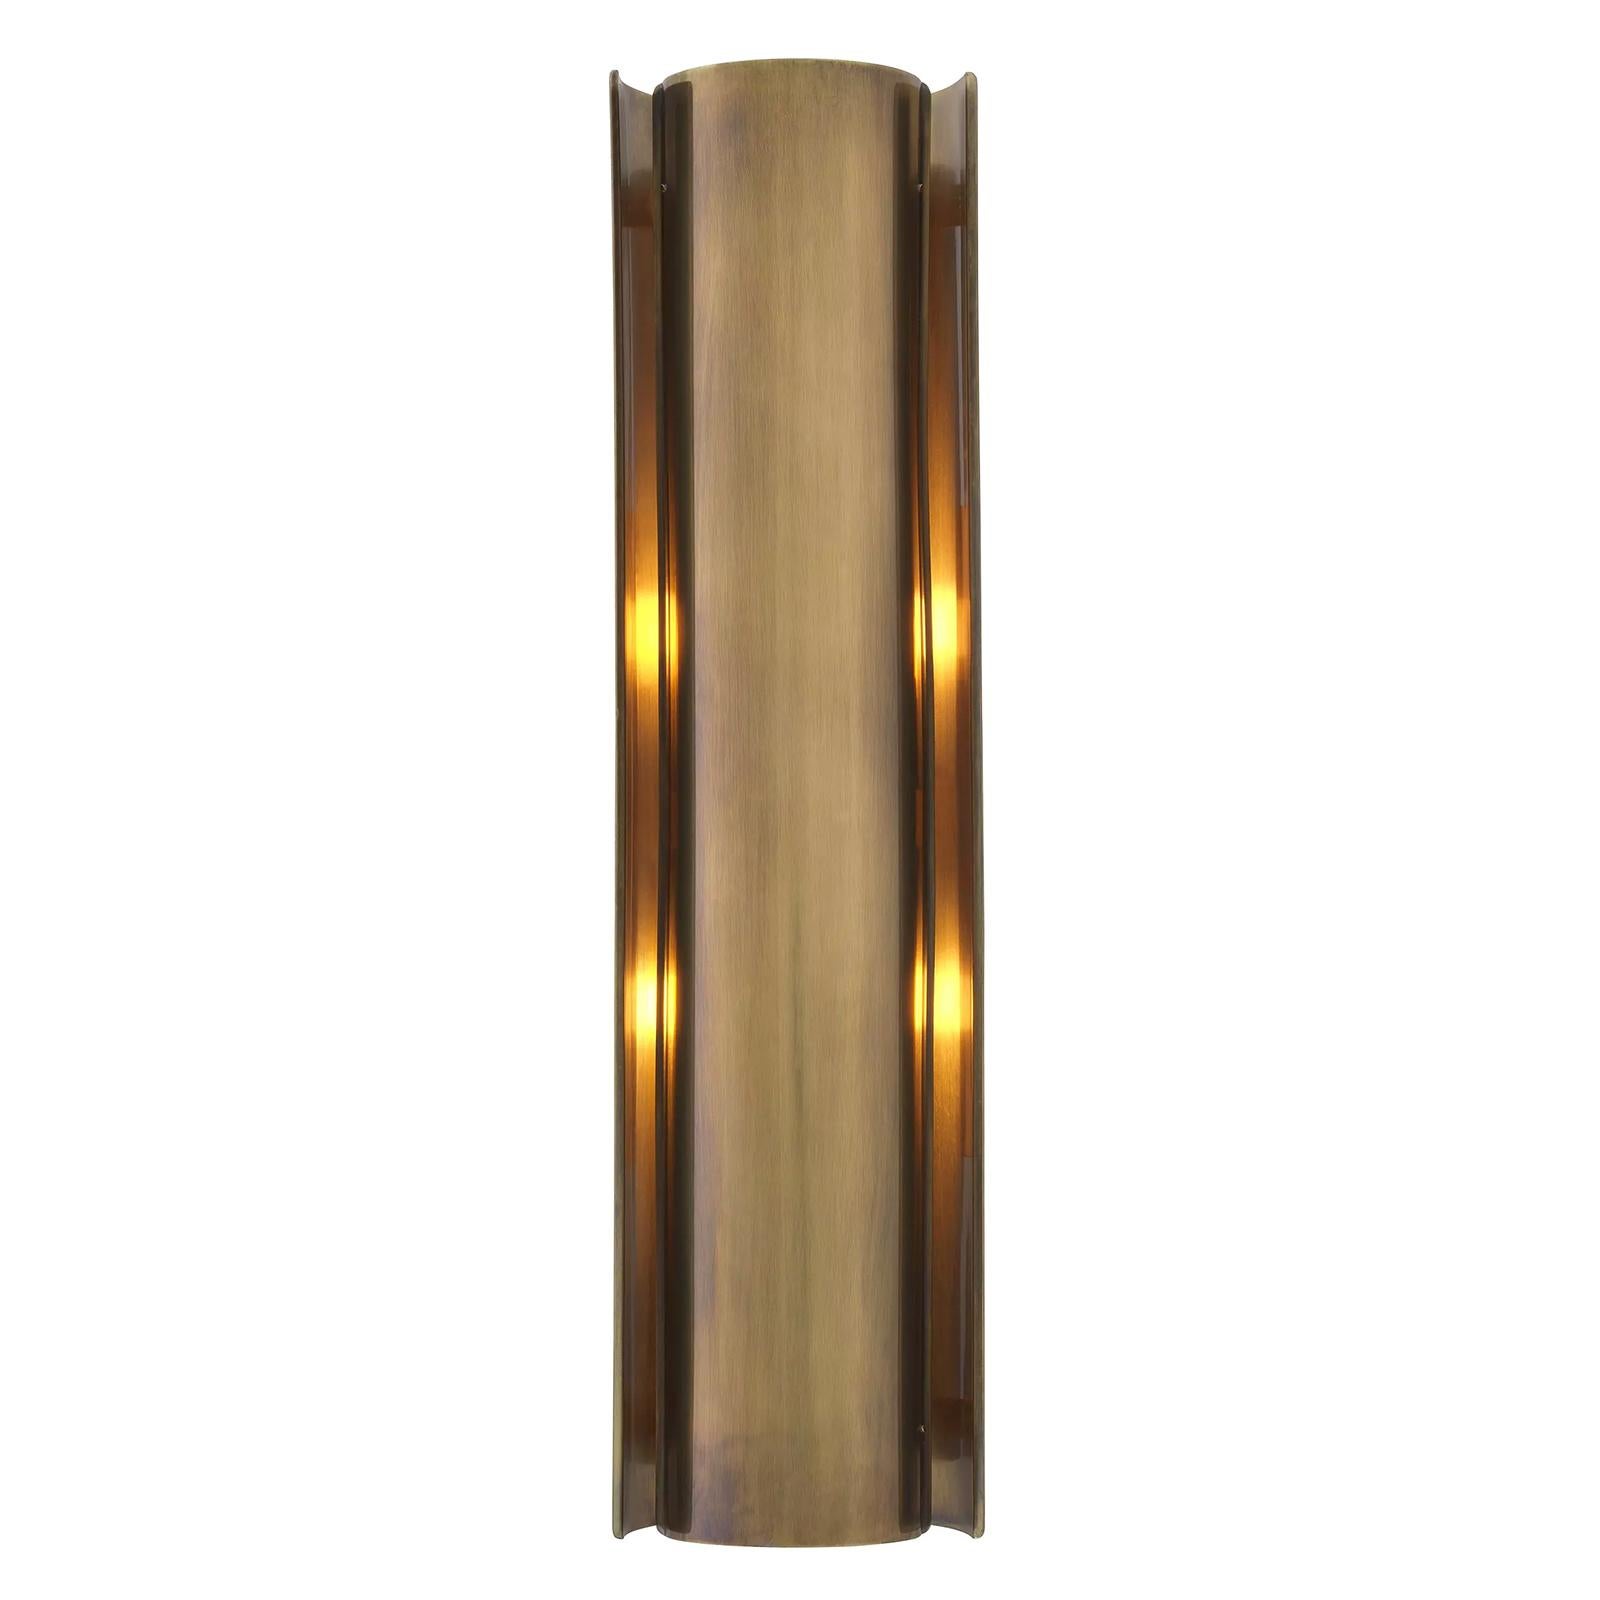 Wall Lamp Betty Large with all structure in steel, iron and solid brass
in vintage finish. With 2 bulbs (not included), lamp holder type E27, 
Max 40 watt, dimmable (dimmer not included).